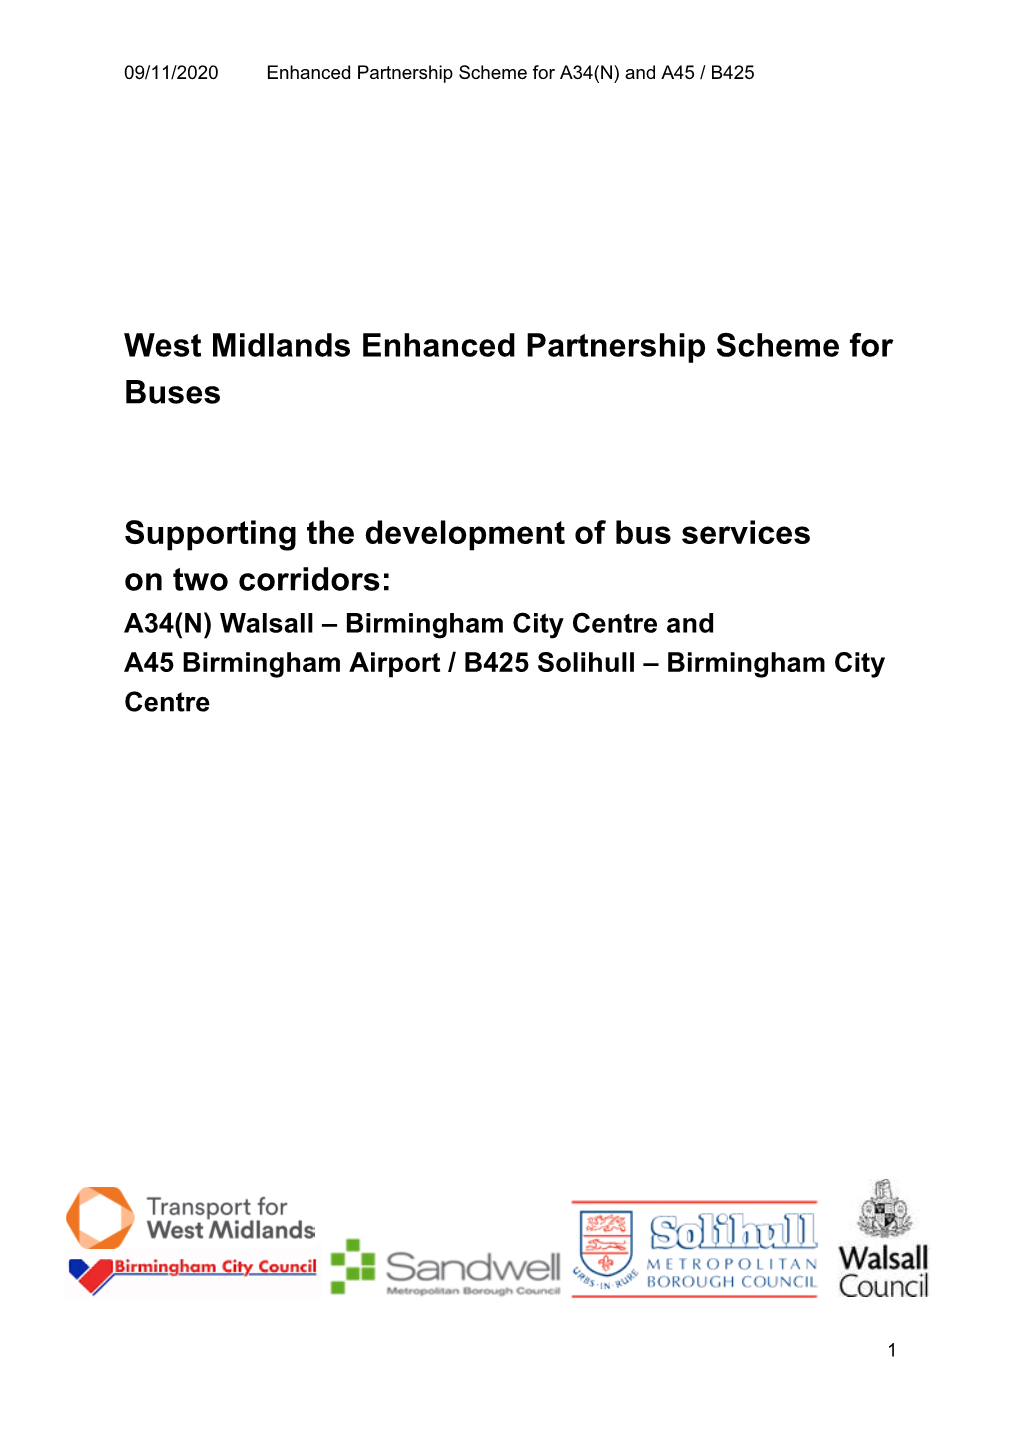 West Midlands Enhanced Partnership Scheme for Buses Supporting The